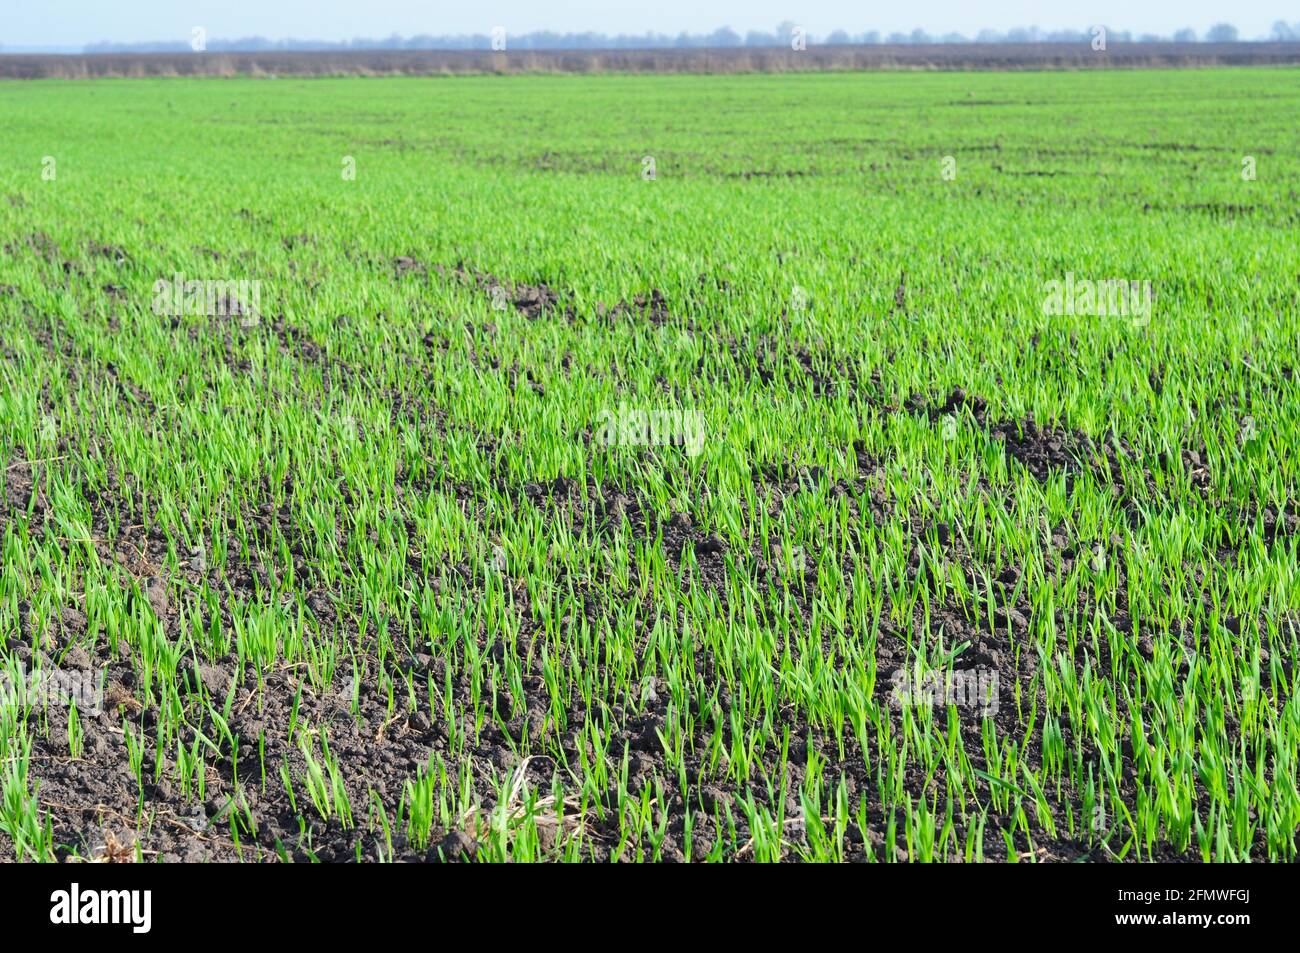 Agriculture, cereal farming, wheat and barley production: a field with young green winter wheat, barley shoots, sprouts early spring. Stock Photo